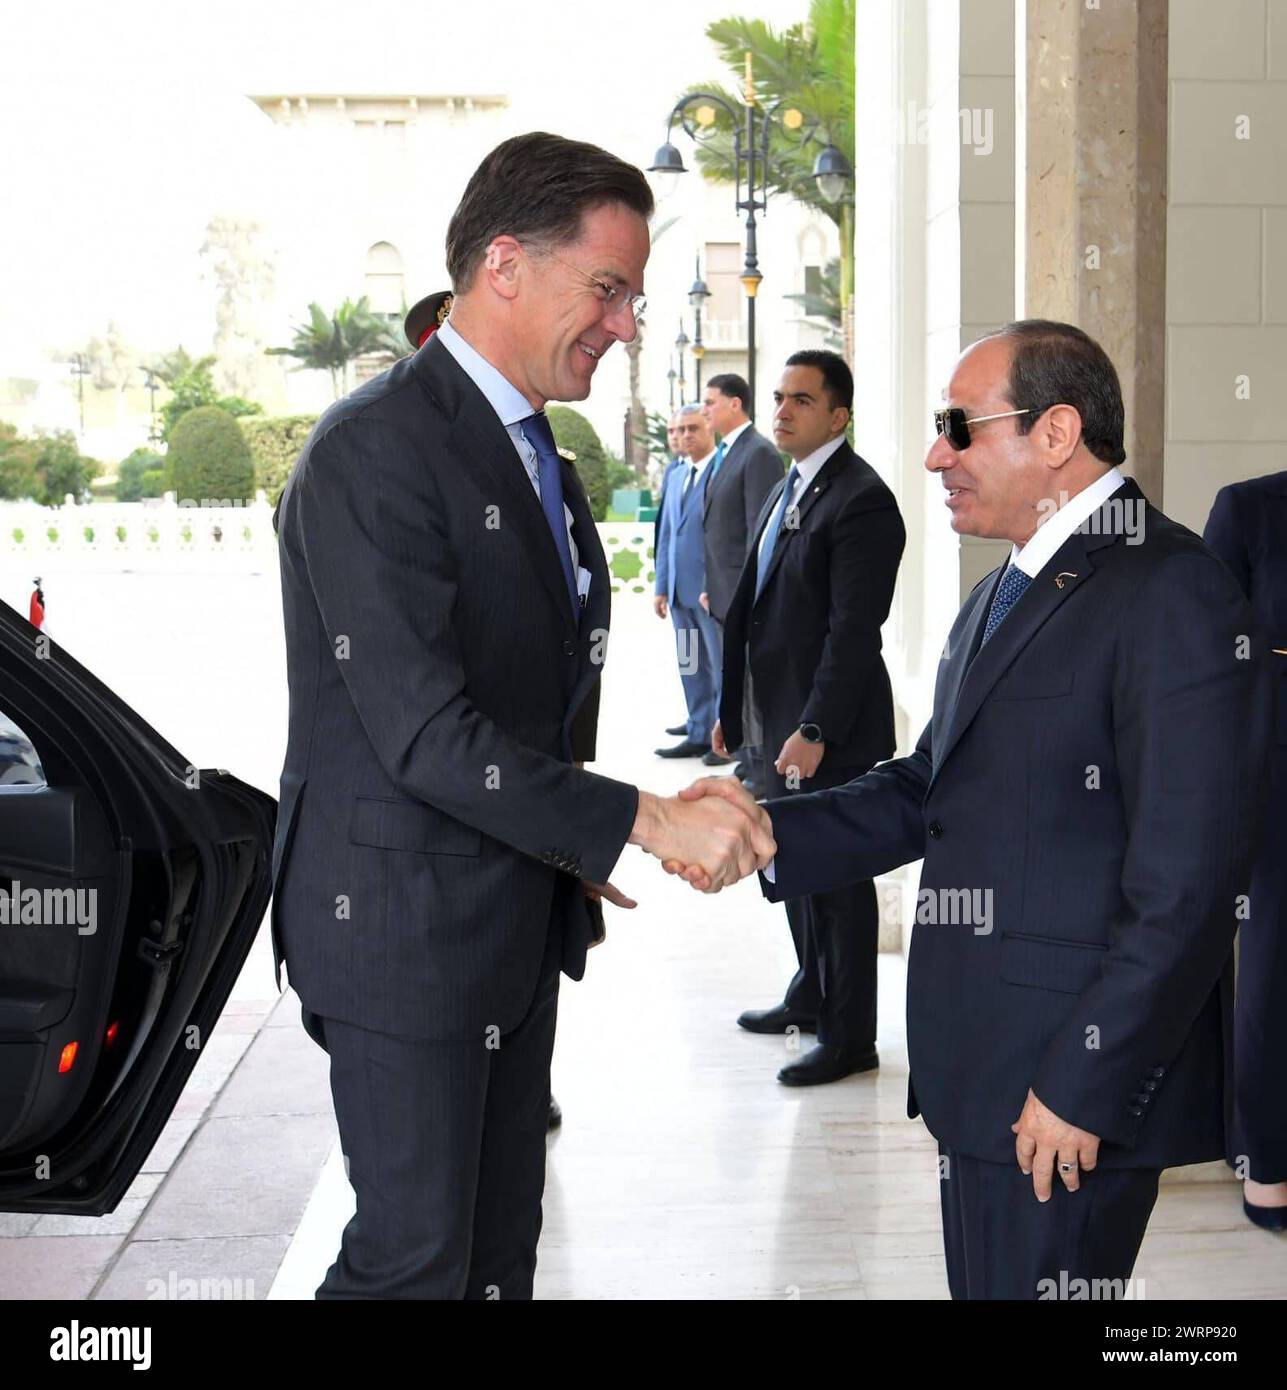 Egyptian President Abdel Fattah El-Sisi receives Prime Minister of the Kingdom of the Netherlands, Mark Rutte Egyptian President Abdel Fattah El-Sisi receives Prime Minister of the Kingdom of the Netherlands, Mark Rutte, in Cairo, Egypt, on March 13, 2024. Photo by Egyptian President Office apaimages Cairo Cairo Egypt 130324 Egypt EPO 003 Copyright: xapaimagesxEgyptianxPresidentxOfficexxapaimagesx Stock Photo